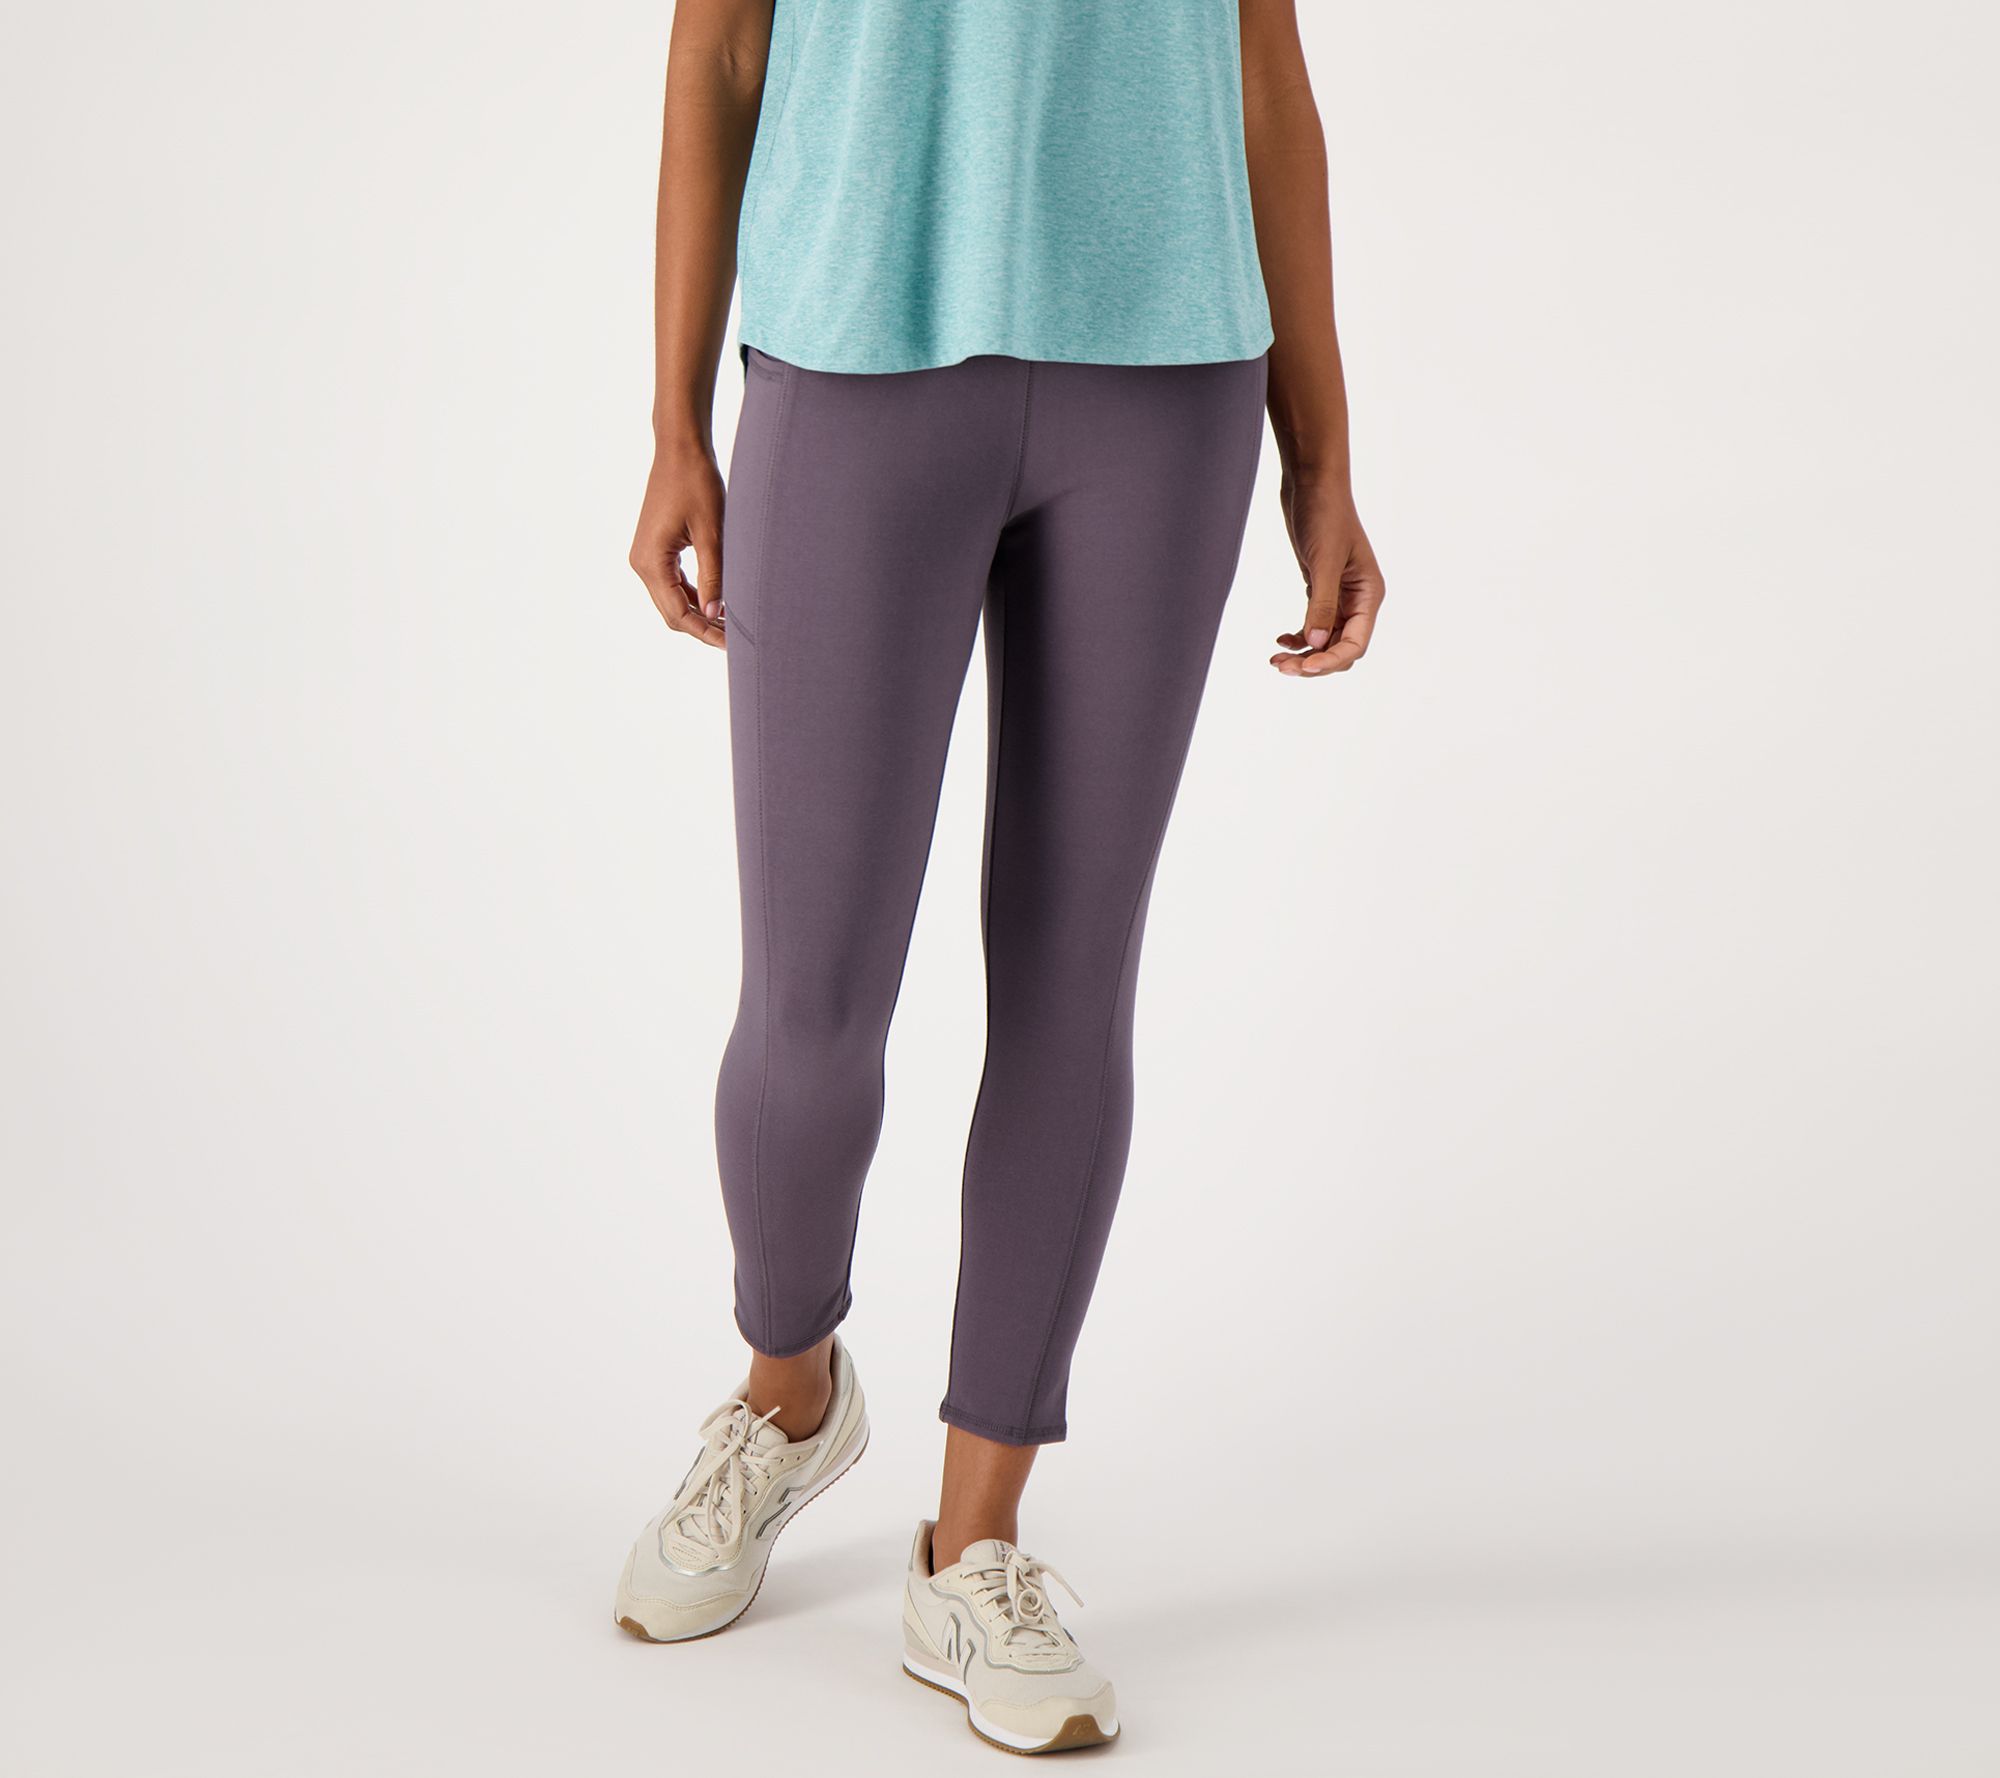 Denim & Co. Active Regular Printed Duo Stretch Legging with Pintuck 